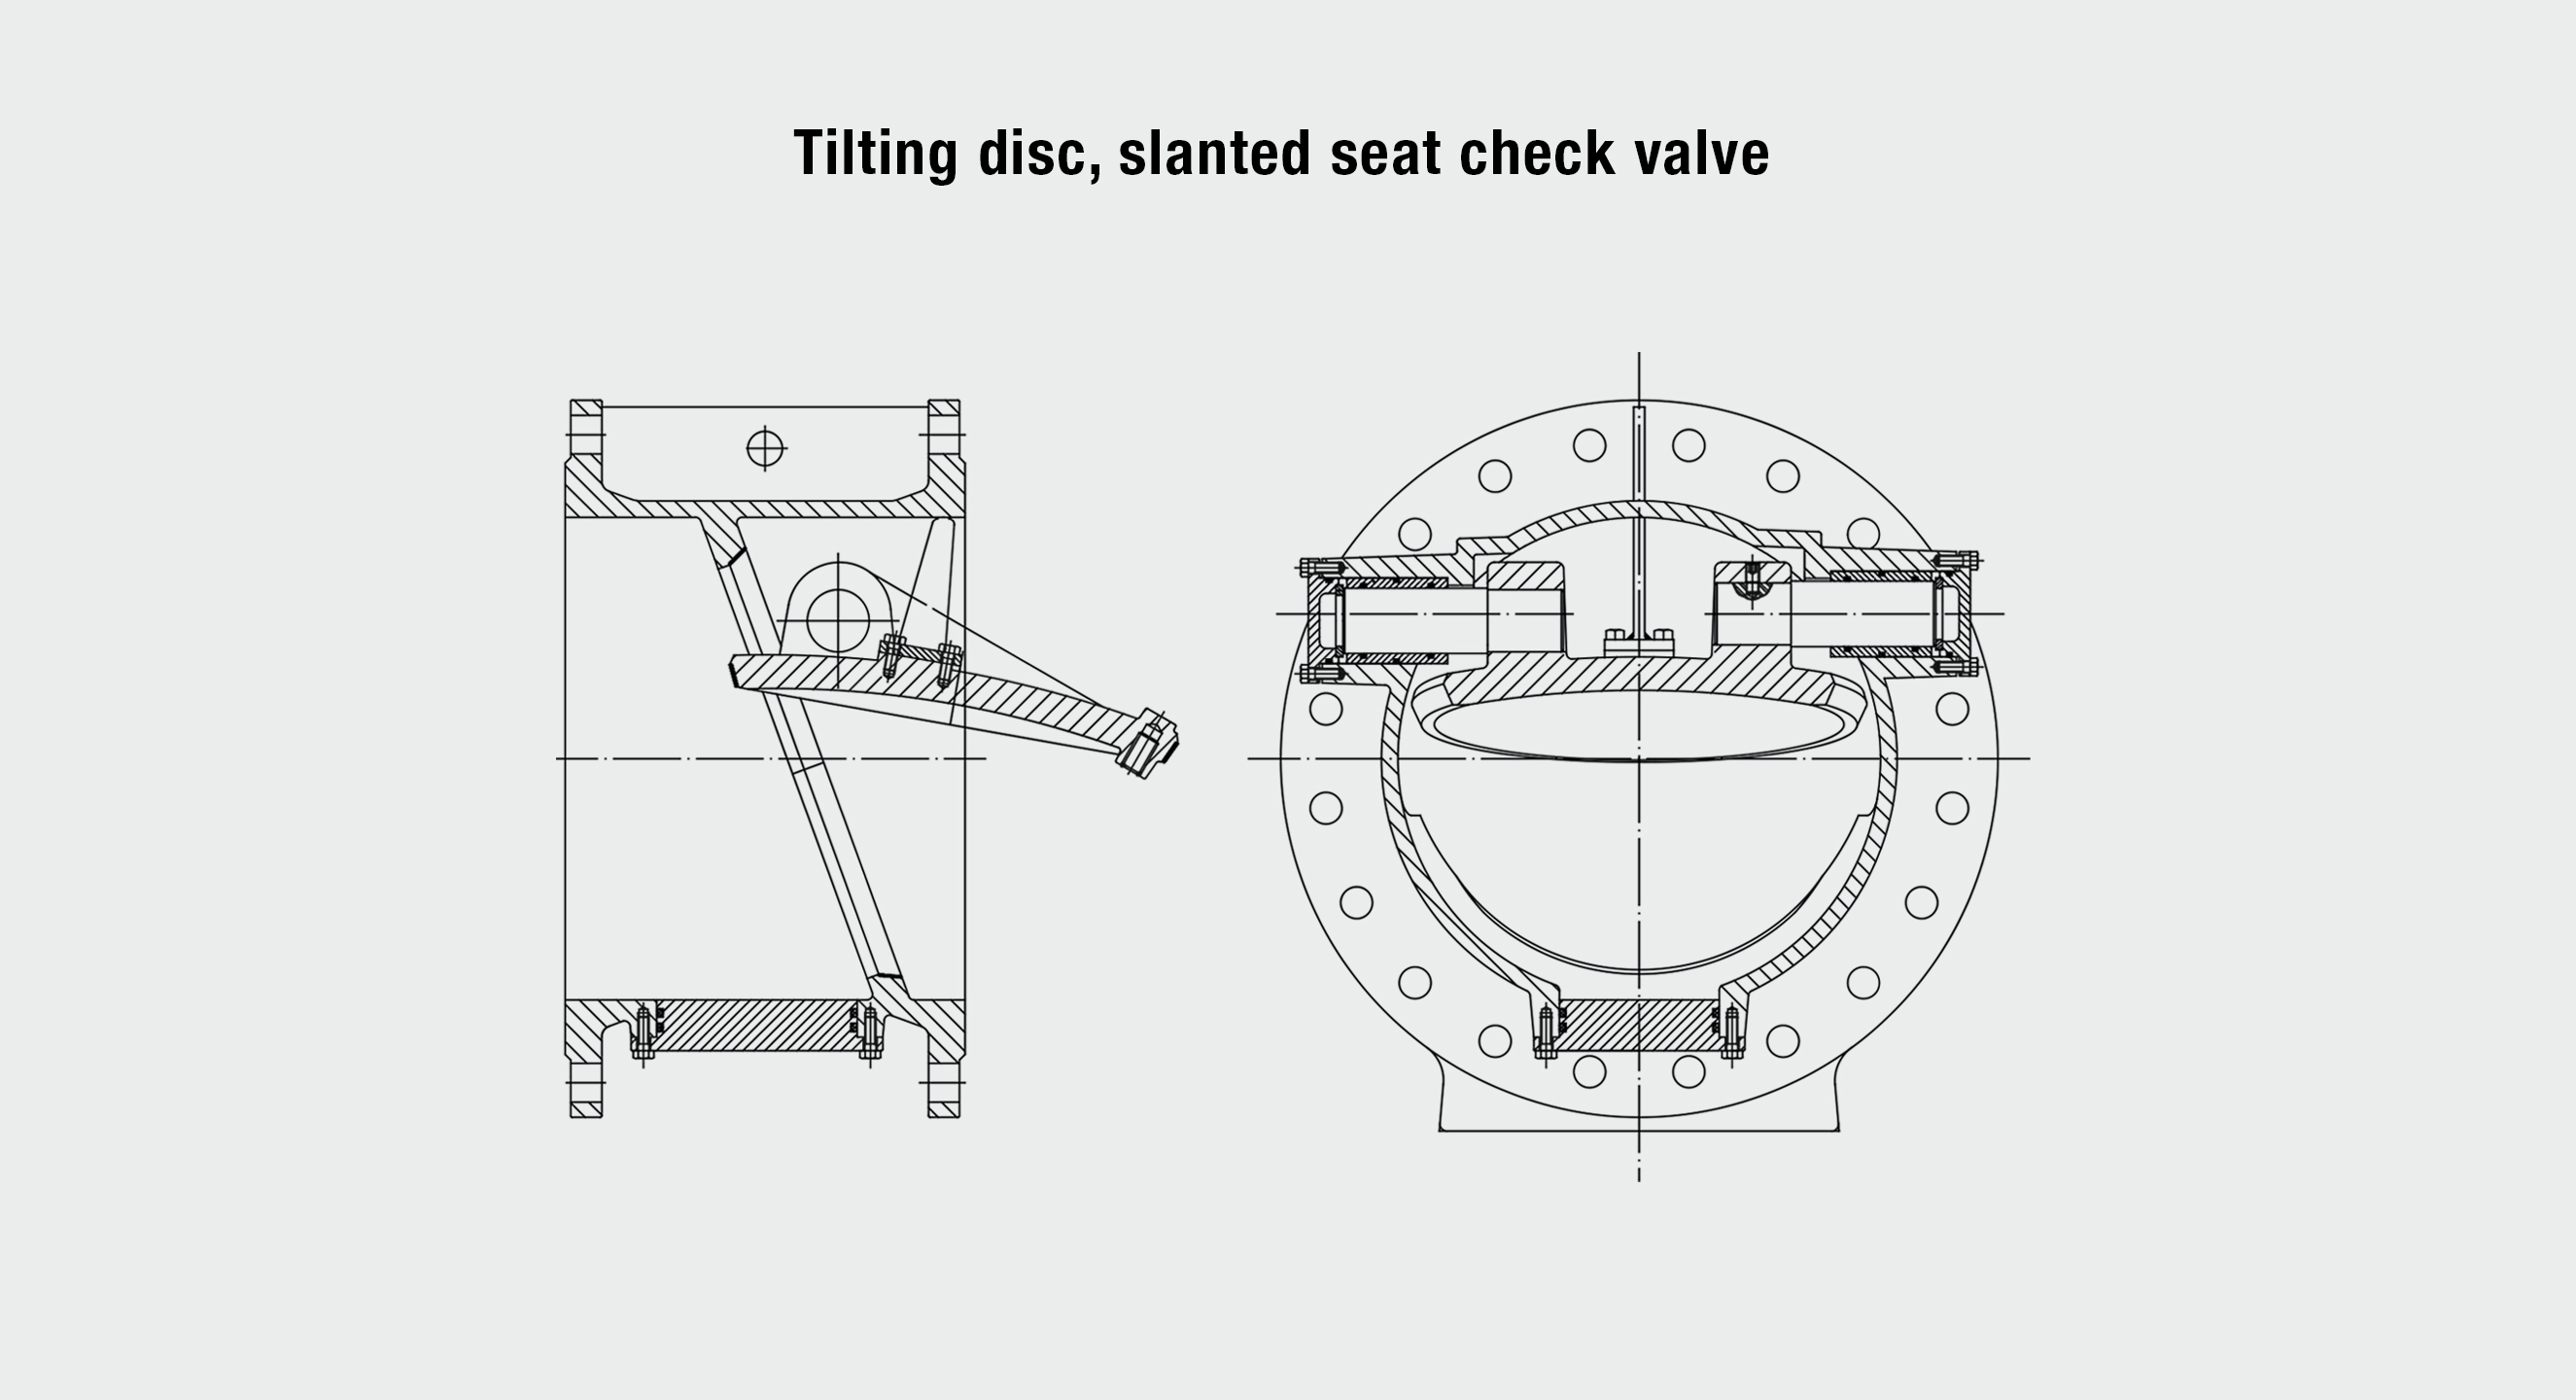 Product drawing of AVK tilting disc, slanted seat check valve